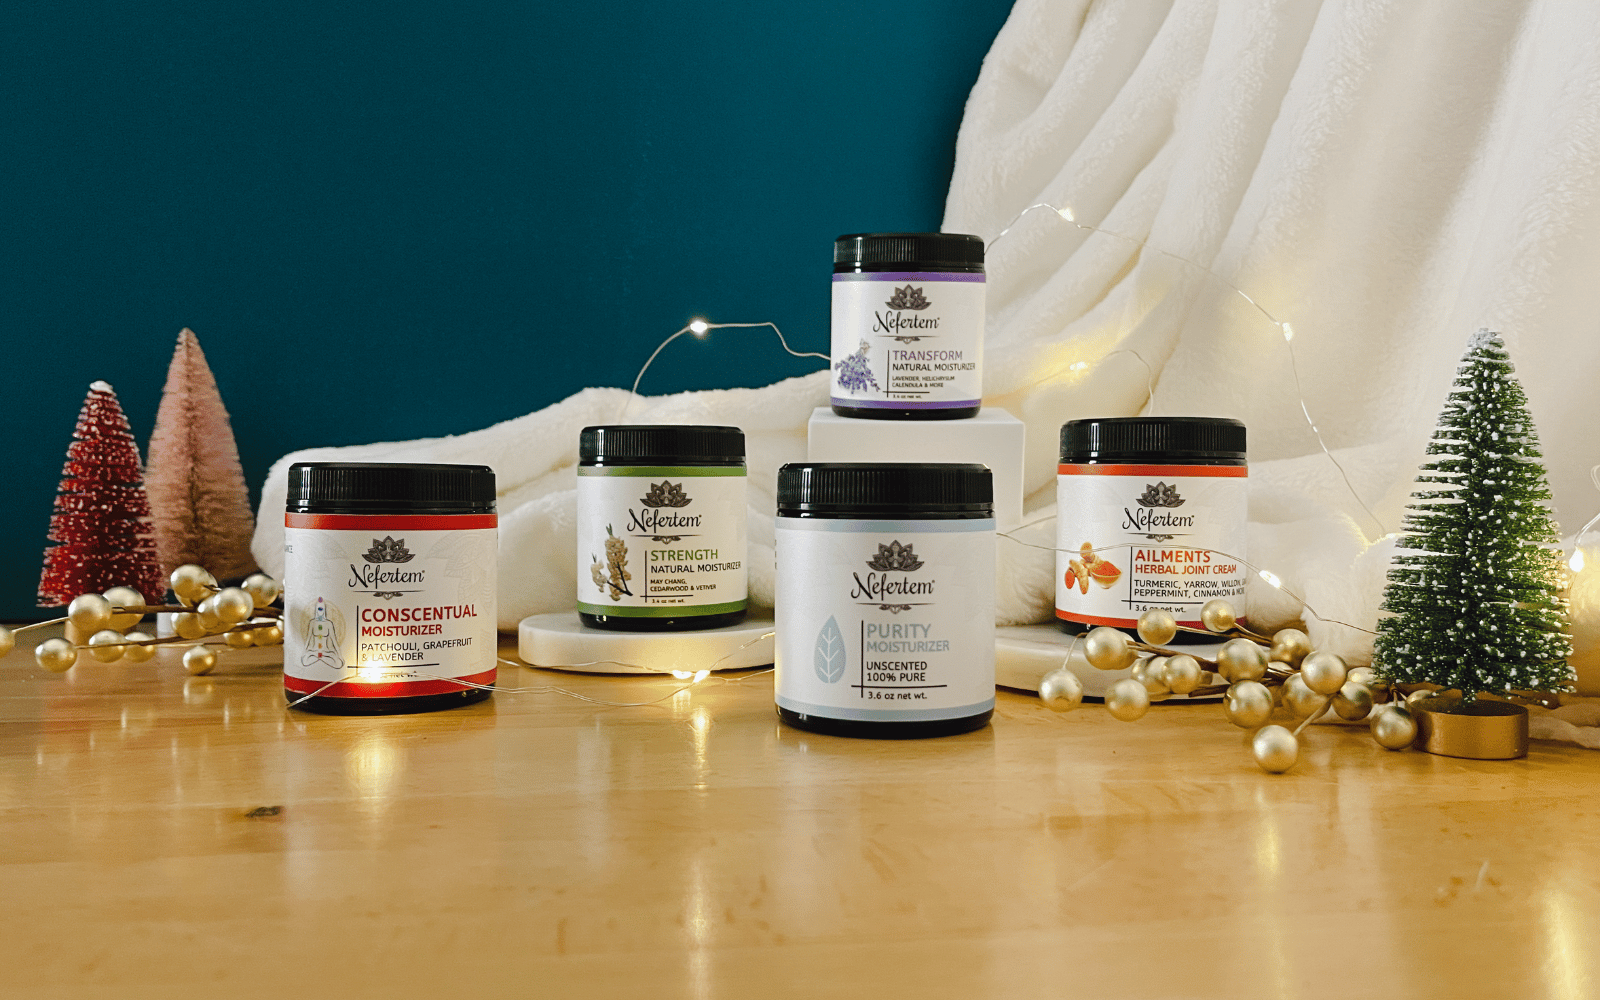 tallow moisturizers for holiday gifts